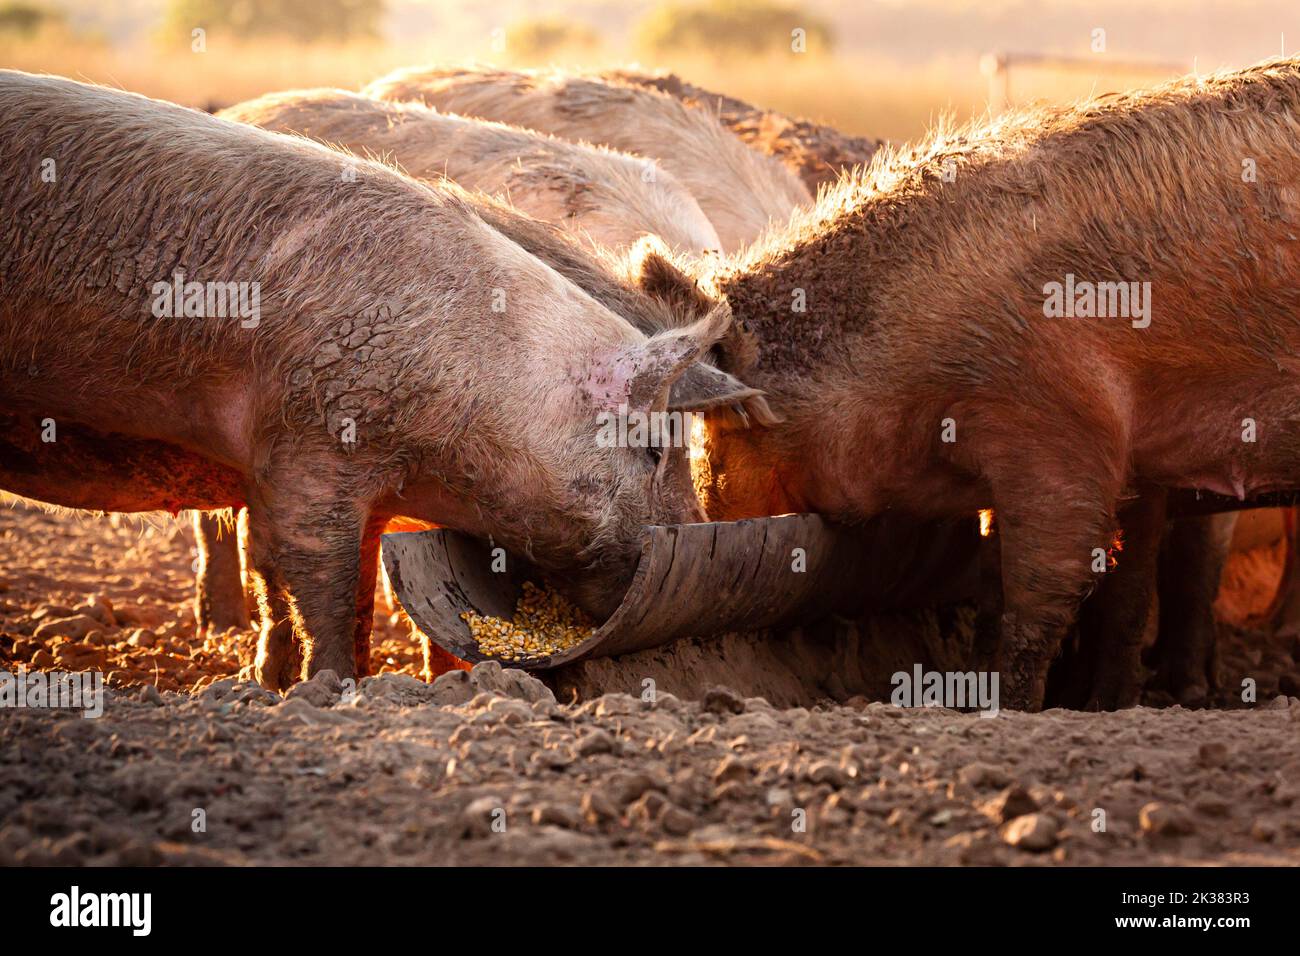 Pink pigs eating corn out of a trough on a remote cattle station in Northern Territory, Australia, at sunrise. Stock Photo